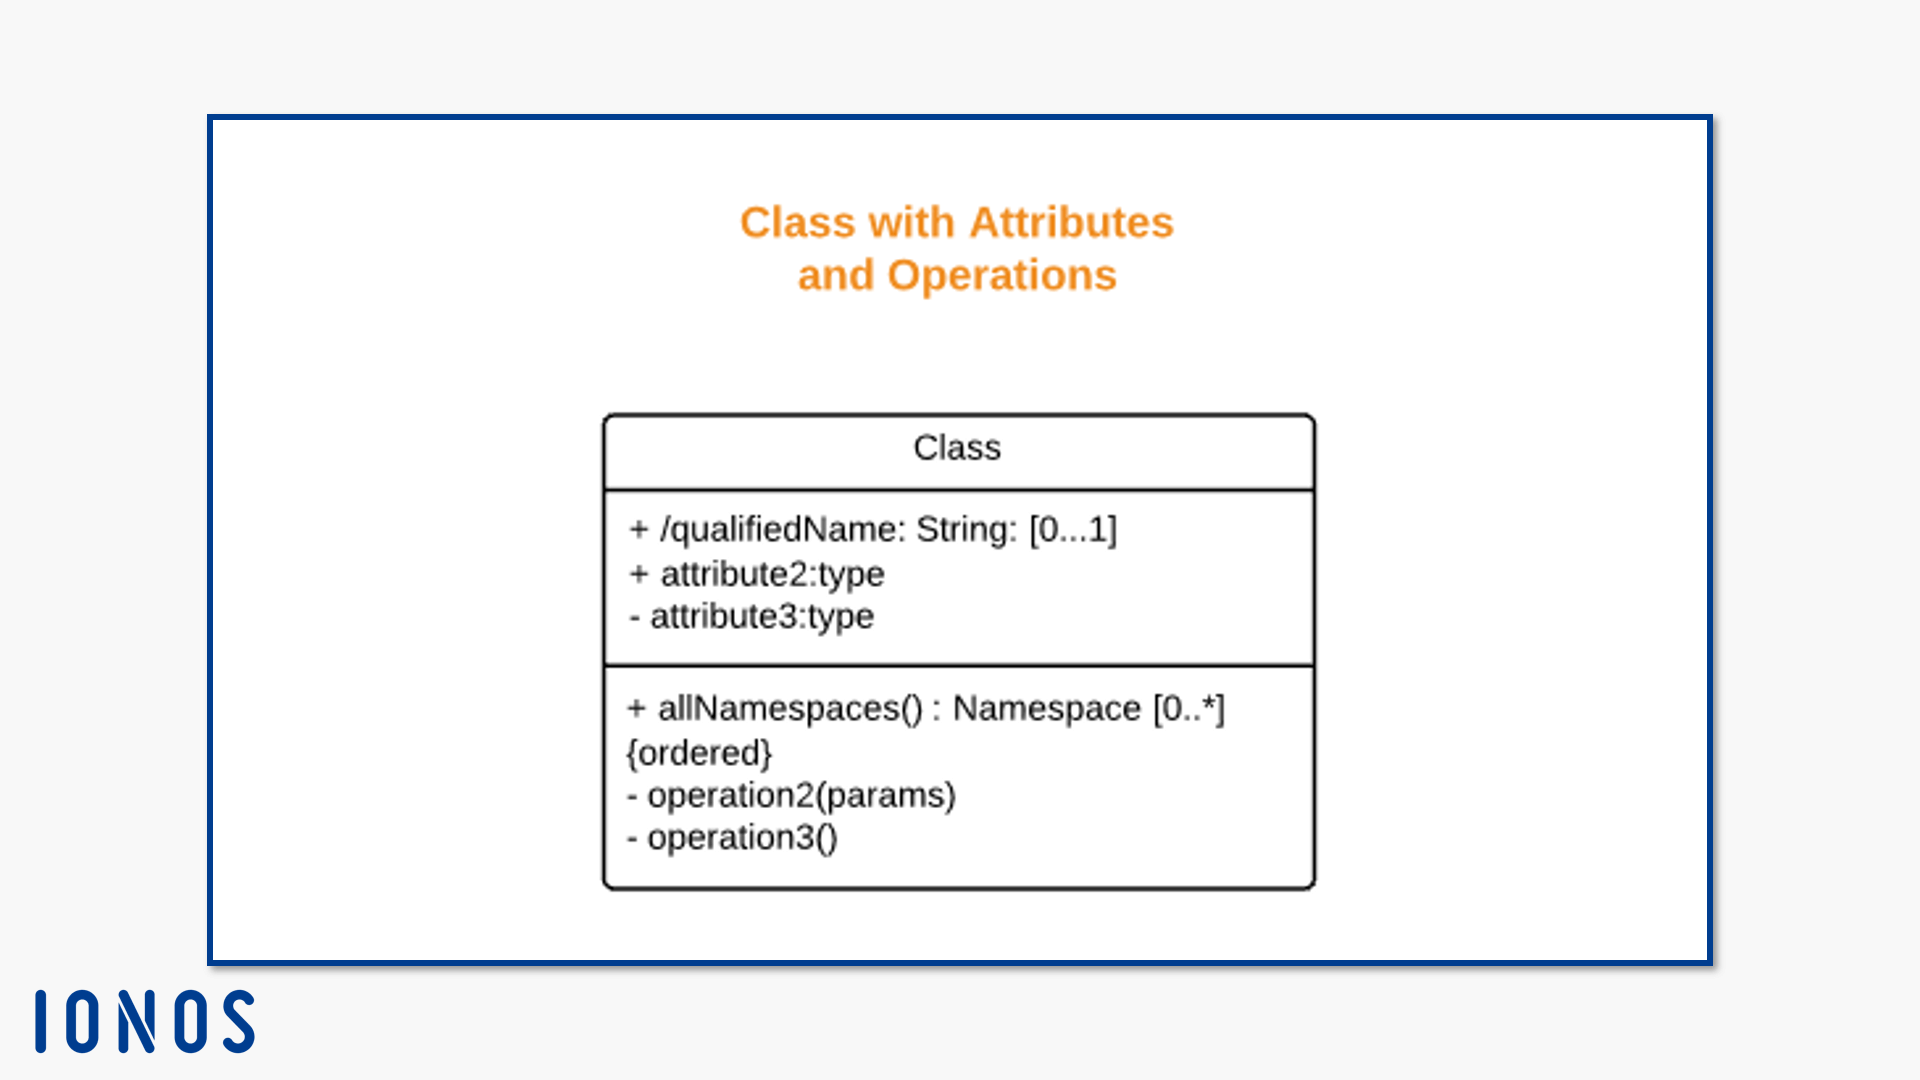 Notation for classes with attributes and operations.